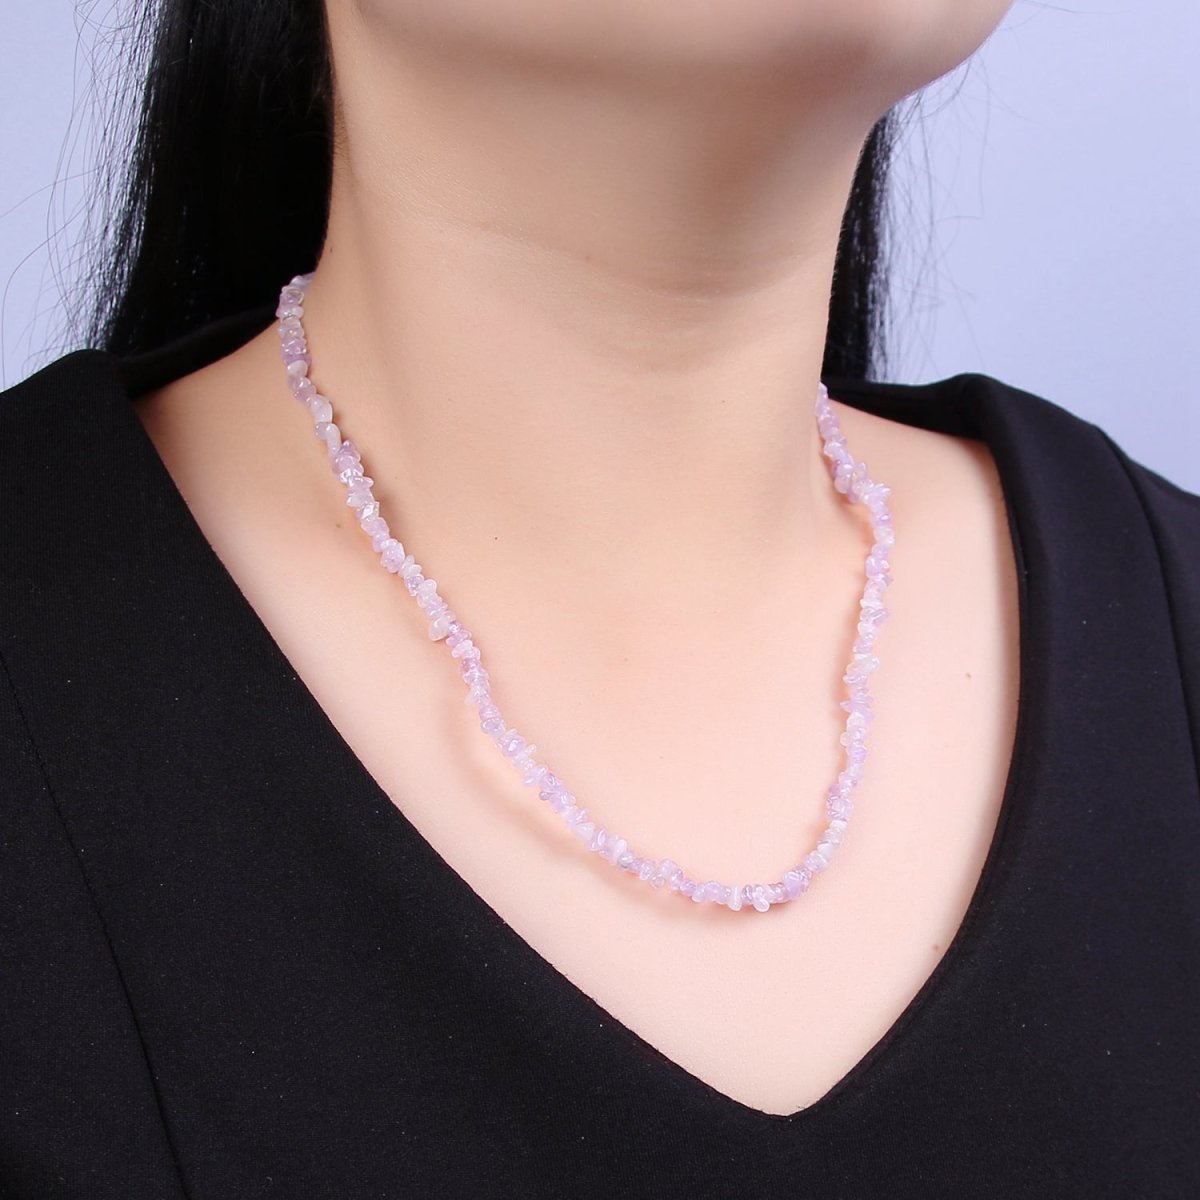 16.5 Inch Natural Purple Ametrine Quartz Crystal Stone Bead Necklace with 2" Extender | WA-636 Clearance Pricing - DLUXCA